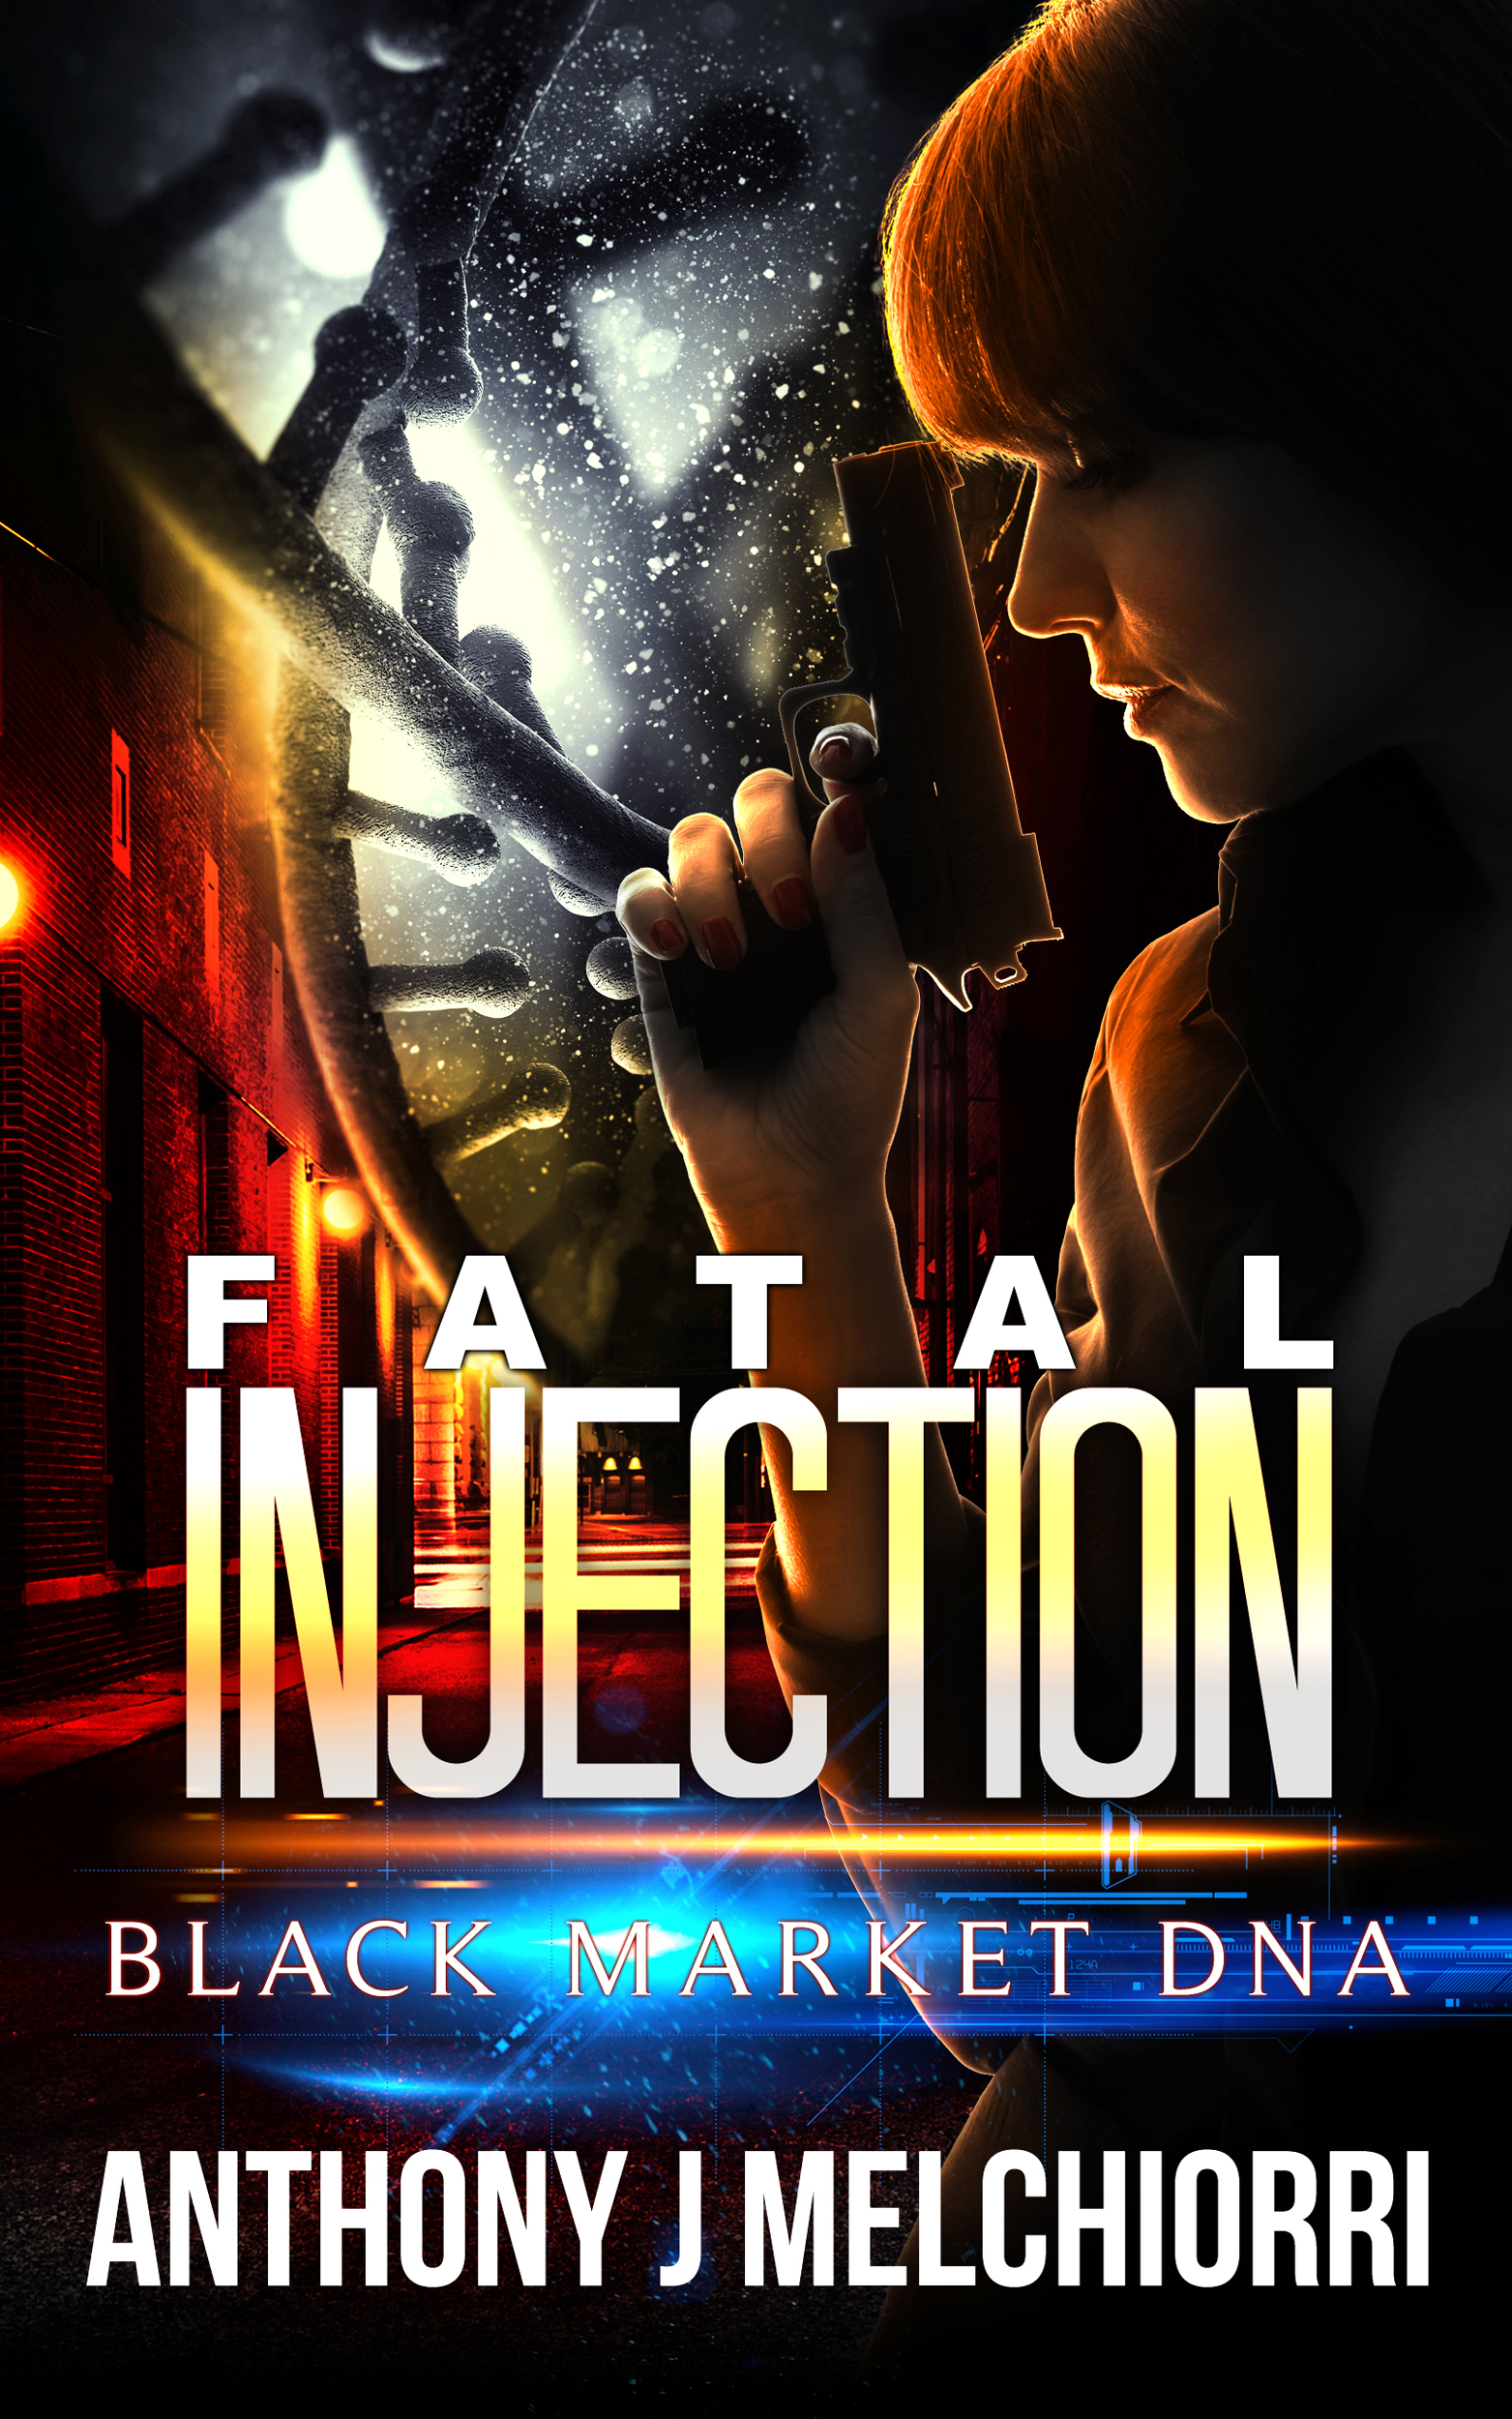 Fatal Injection by Anthony J Melchiorri